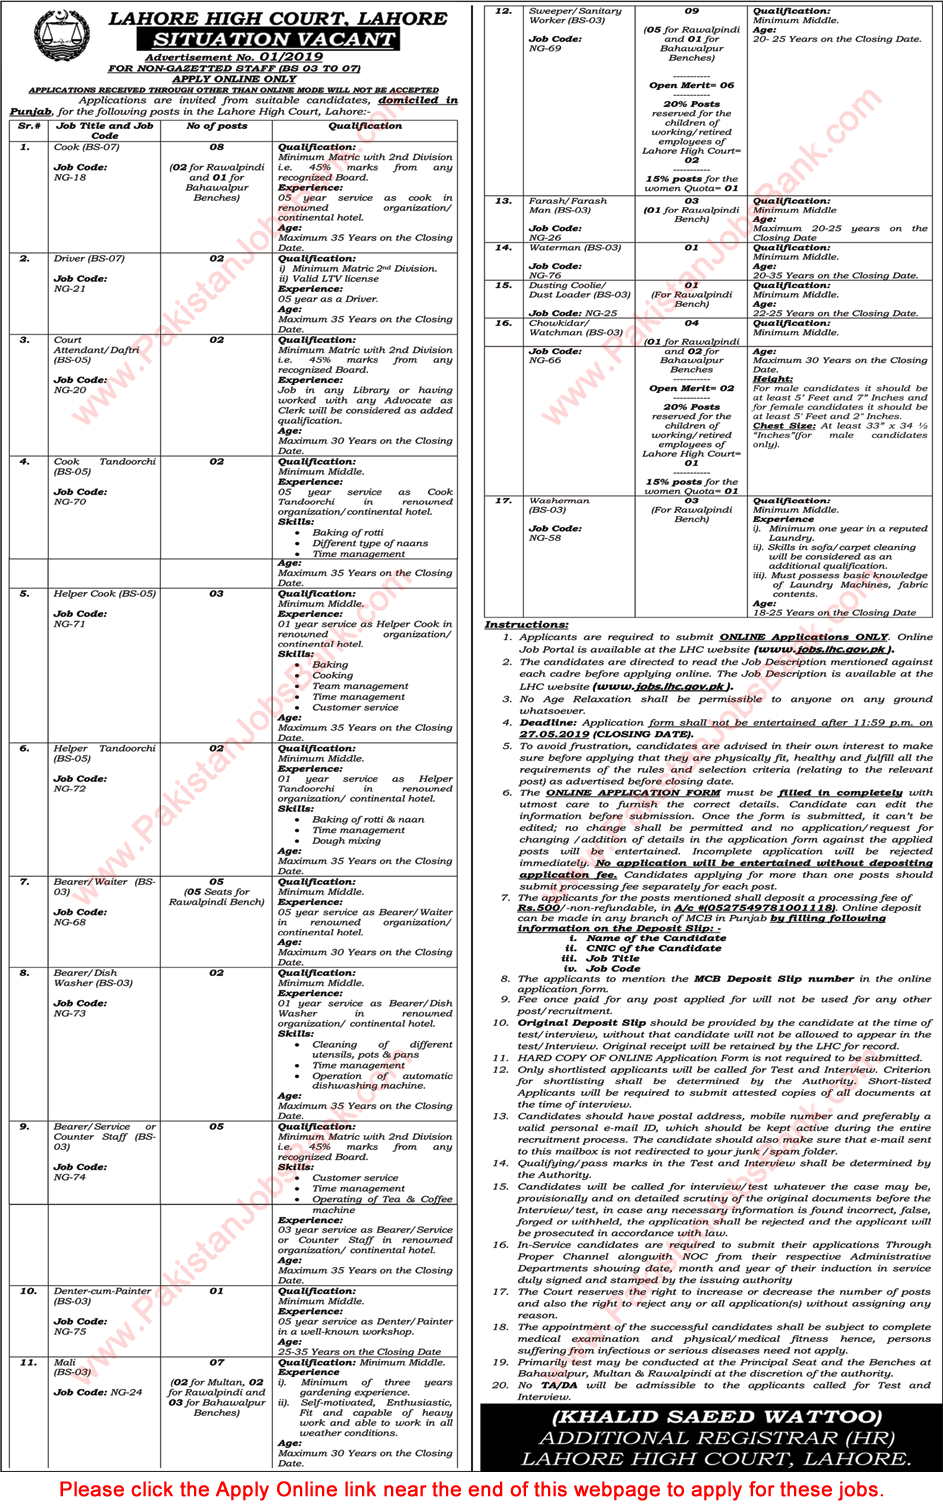 Lahore High Court Jobs 2019 May Apply Online Sanitary Workers, Sweepers, Cooks & Others Latest